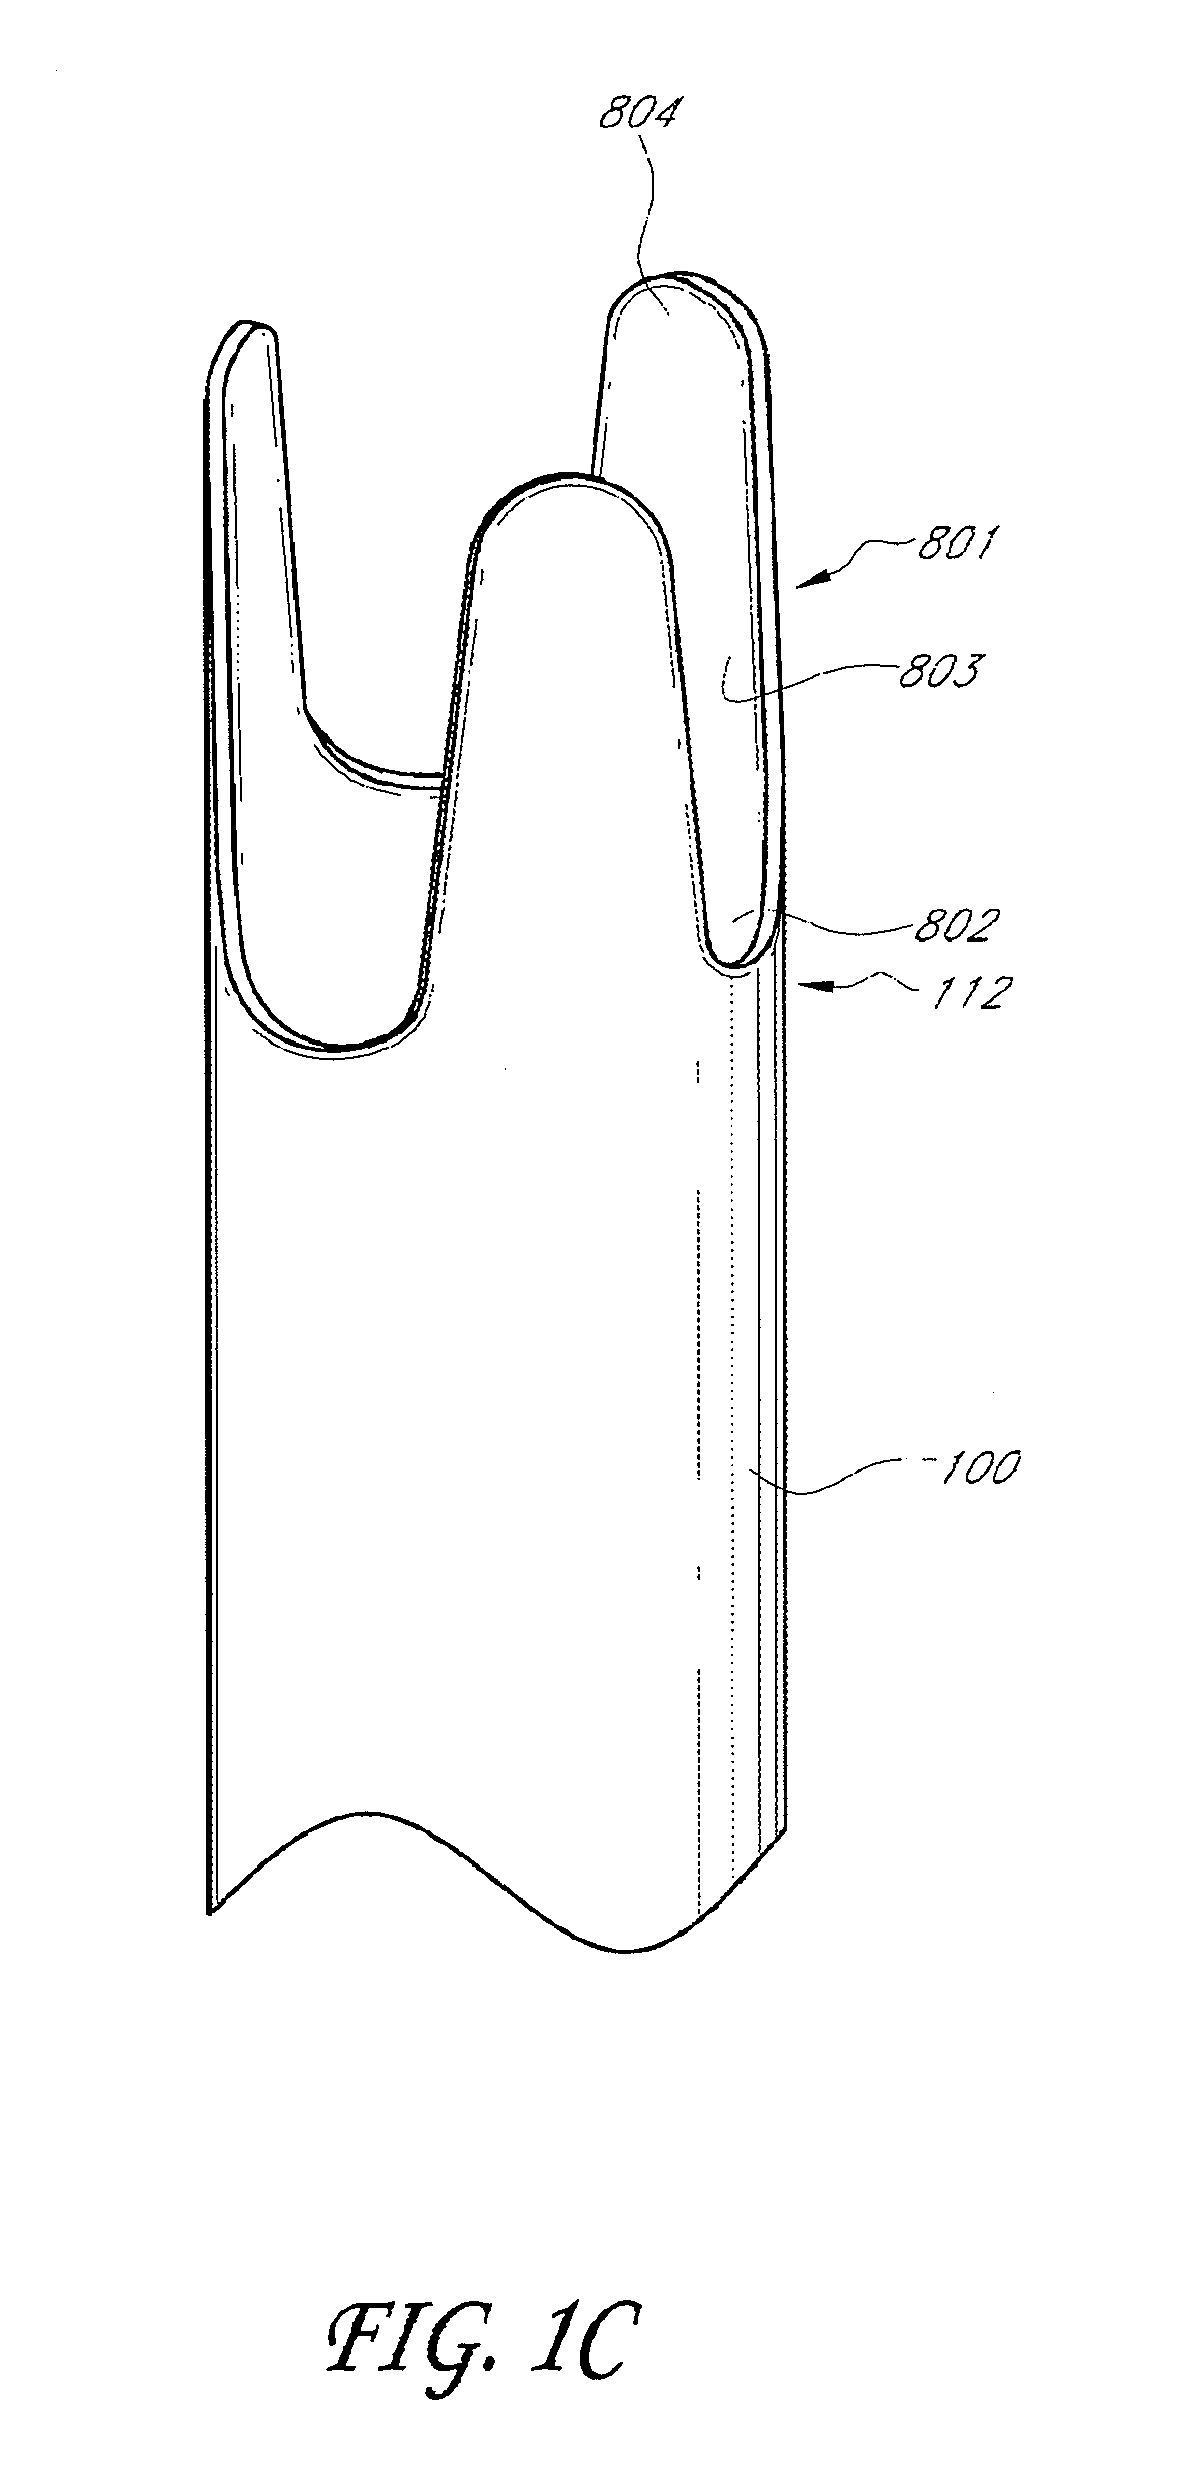 Methods for toposcopic sleeve delivery